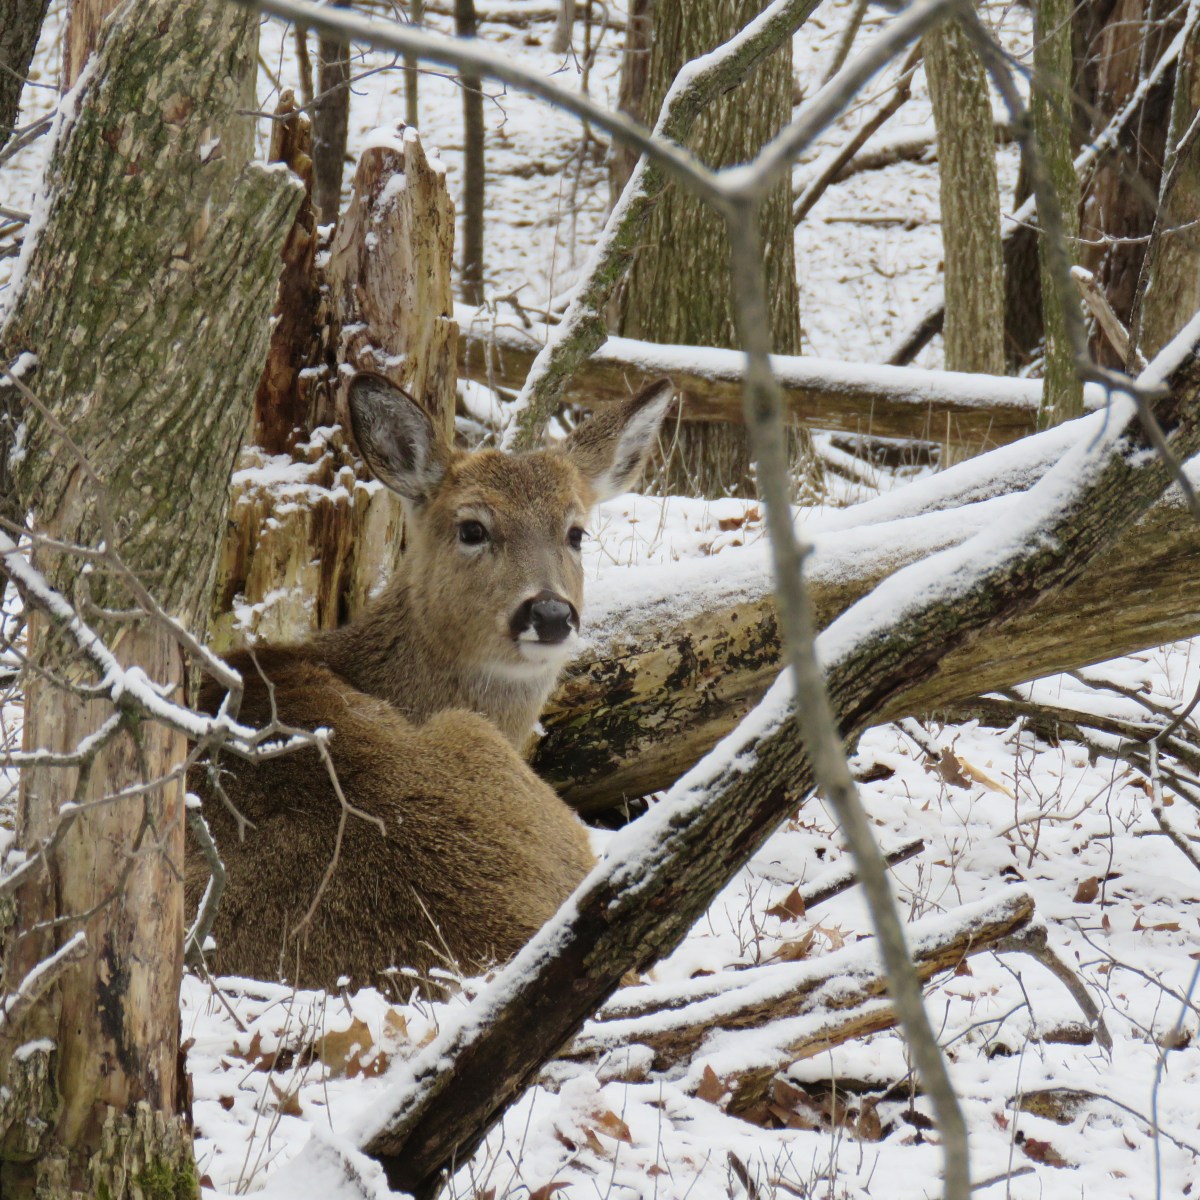 A deer beds down in a wooded area in the snow